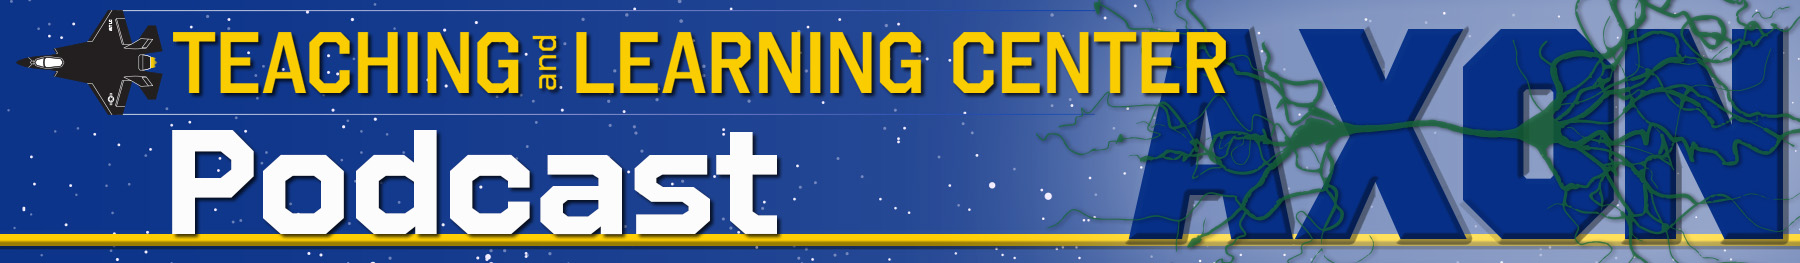 Air University Teaching and Learning Center Banner